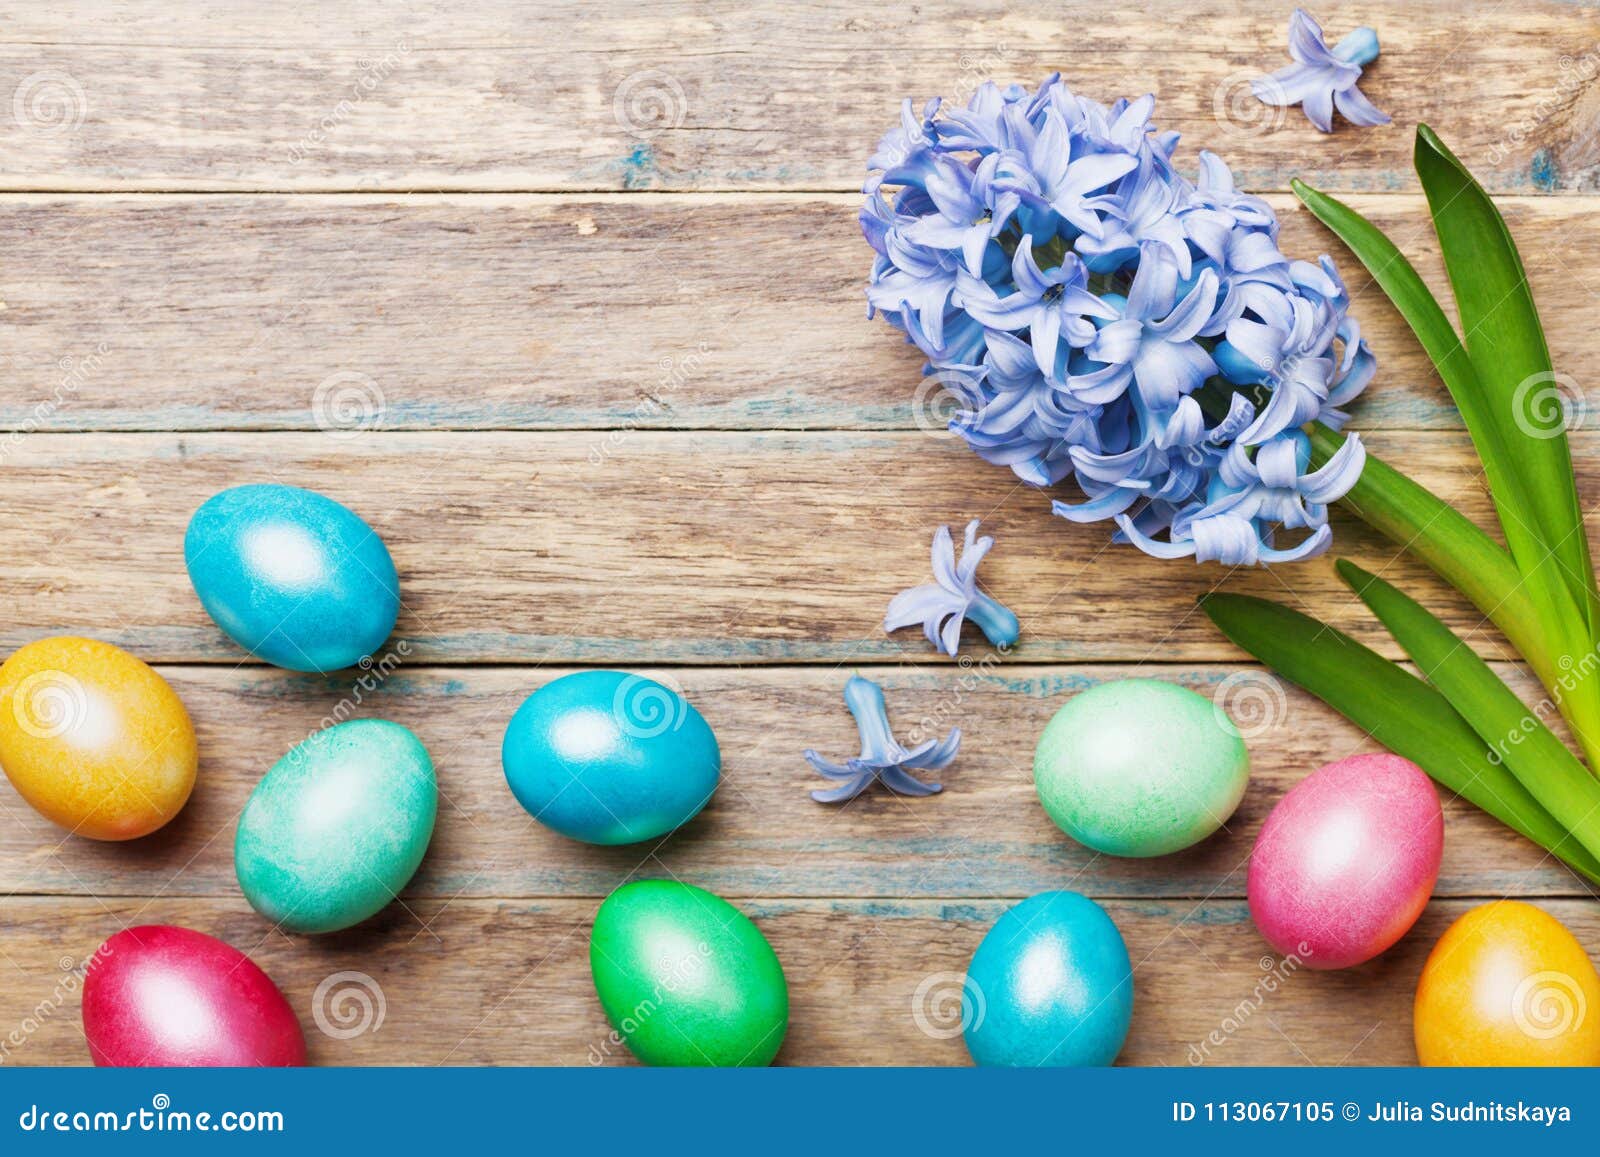 Colorful Easter Eggs Background with Flowers on Wooden Rustic Table Top ...